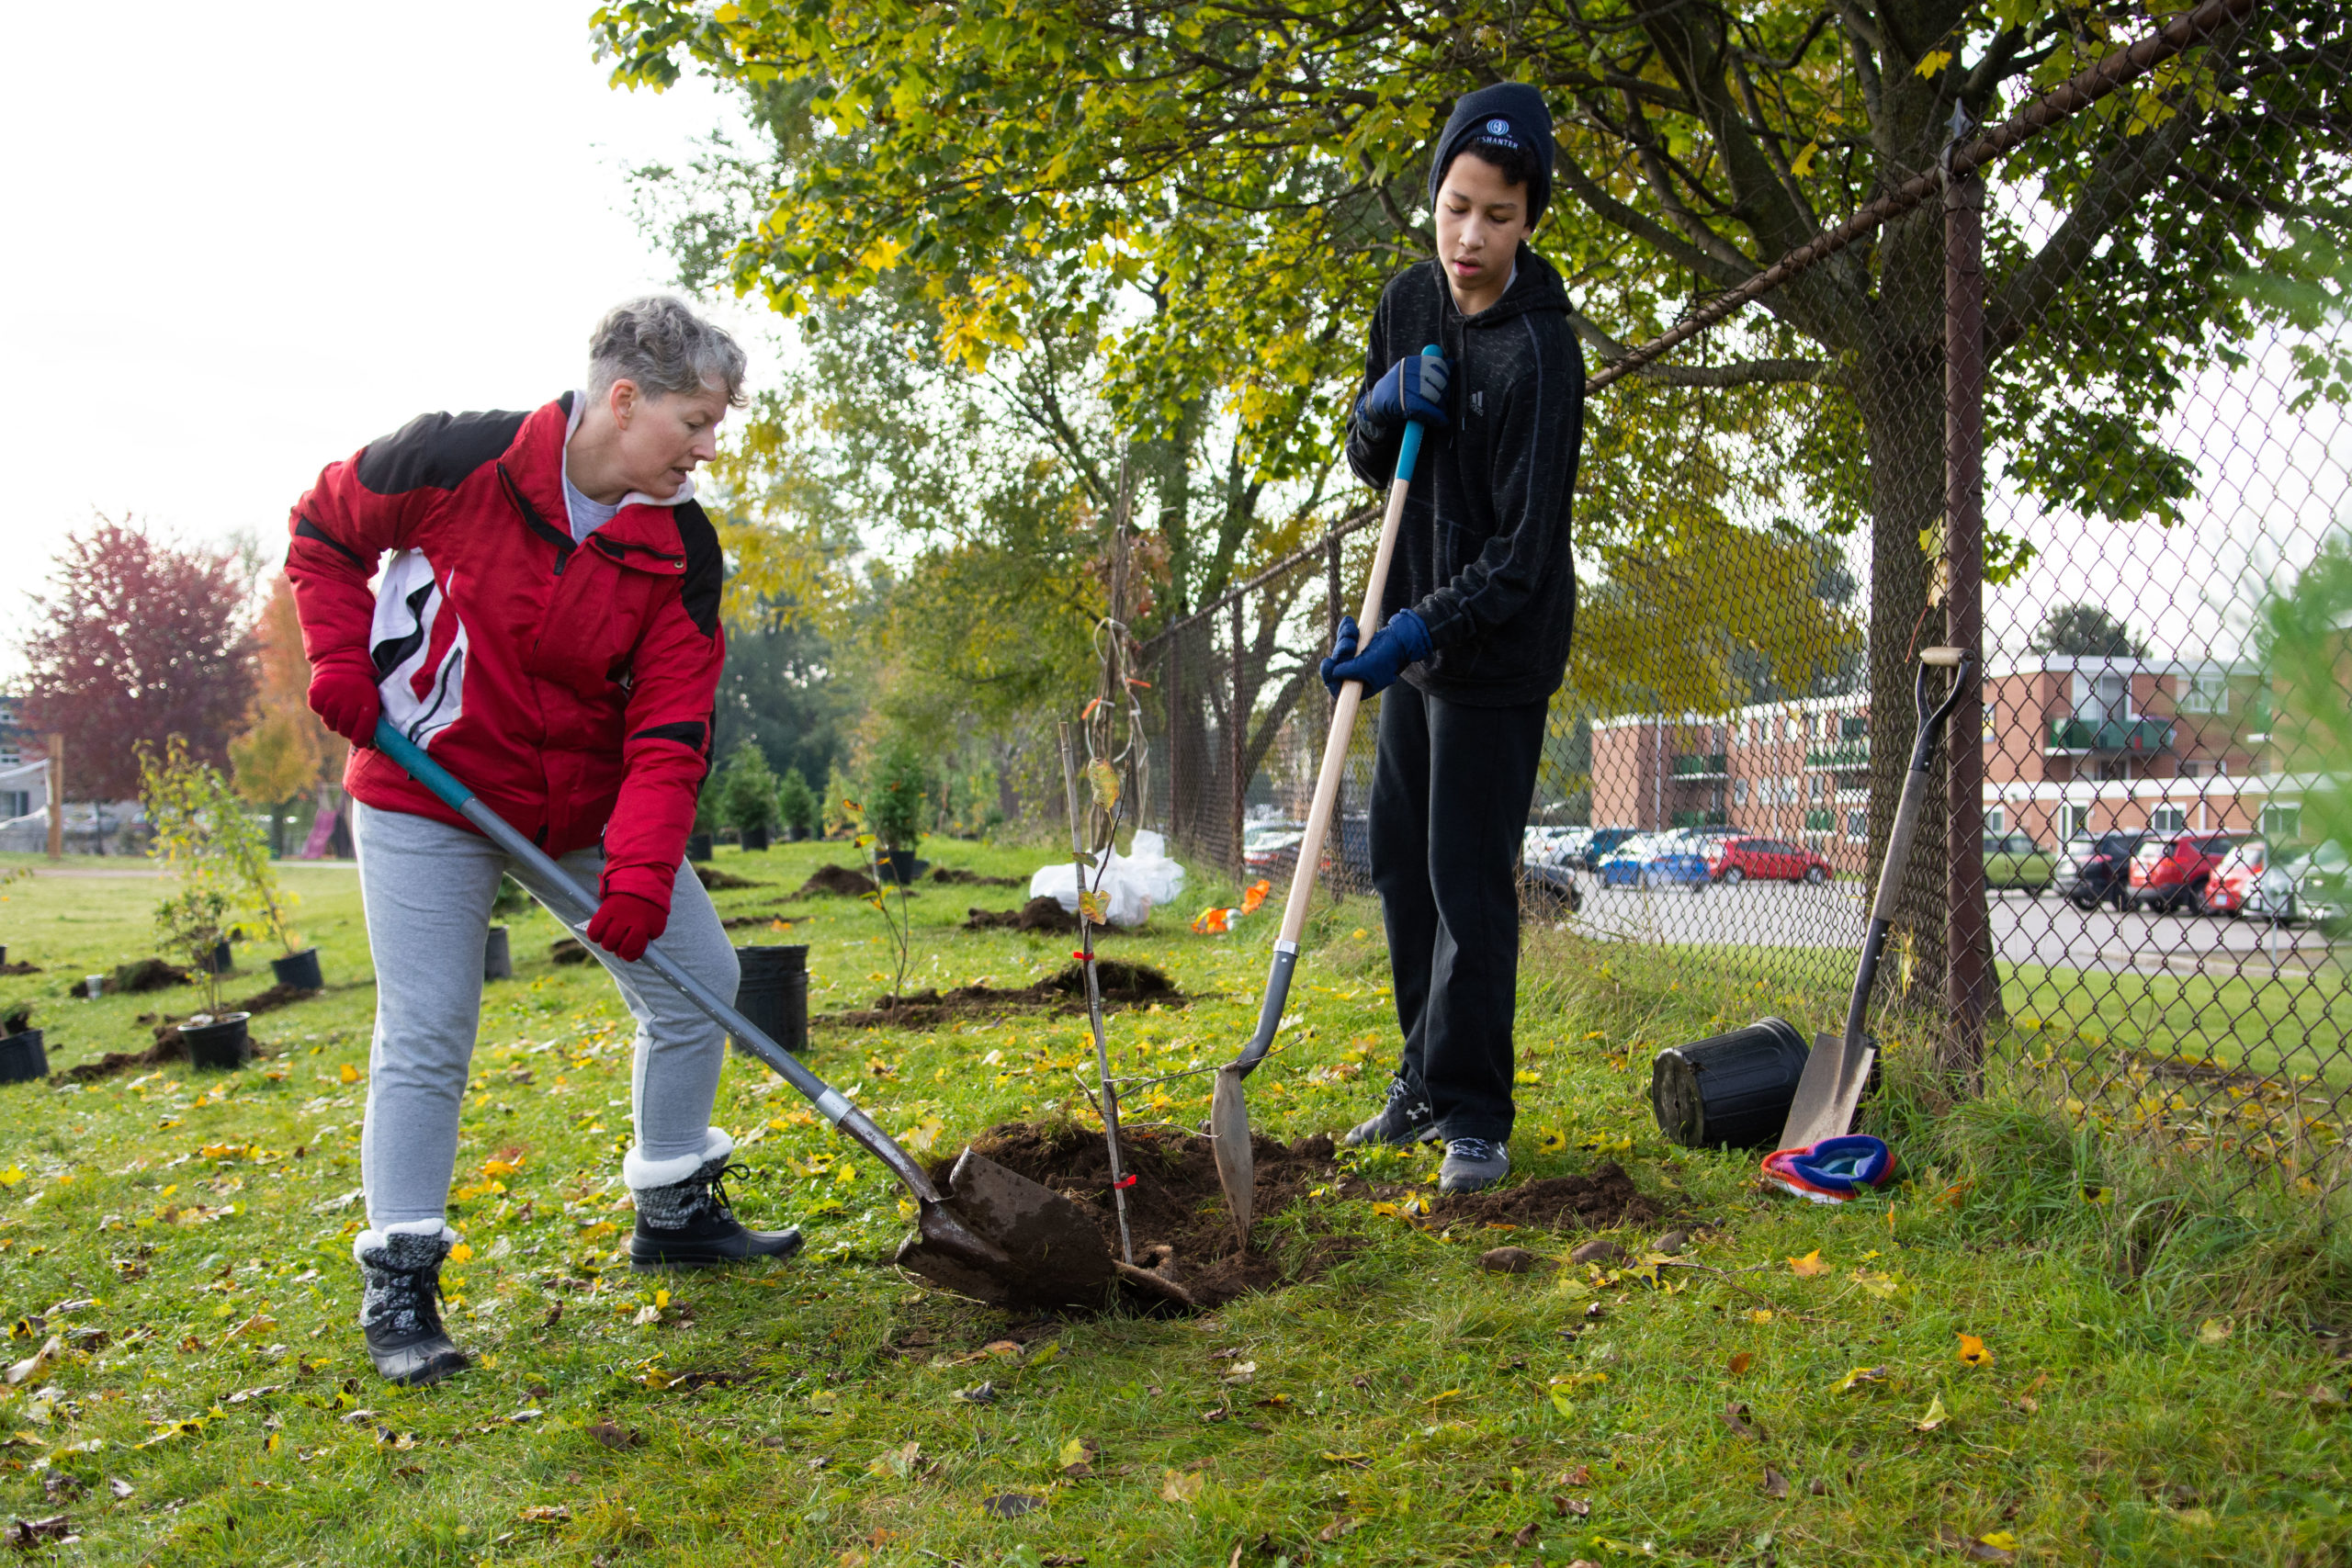 Two people work together on digging a fresh hole for a new tree at Avenue Road Public School.